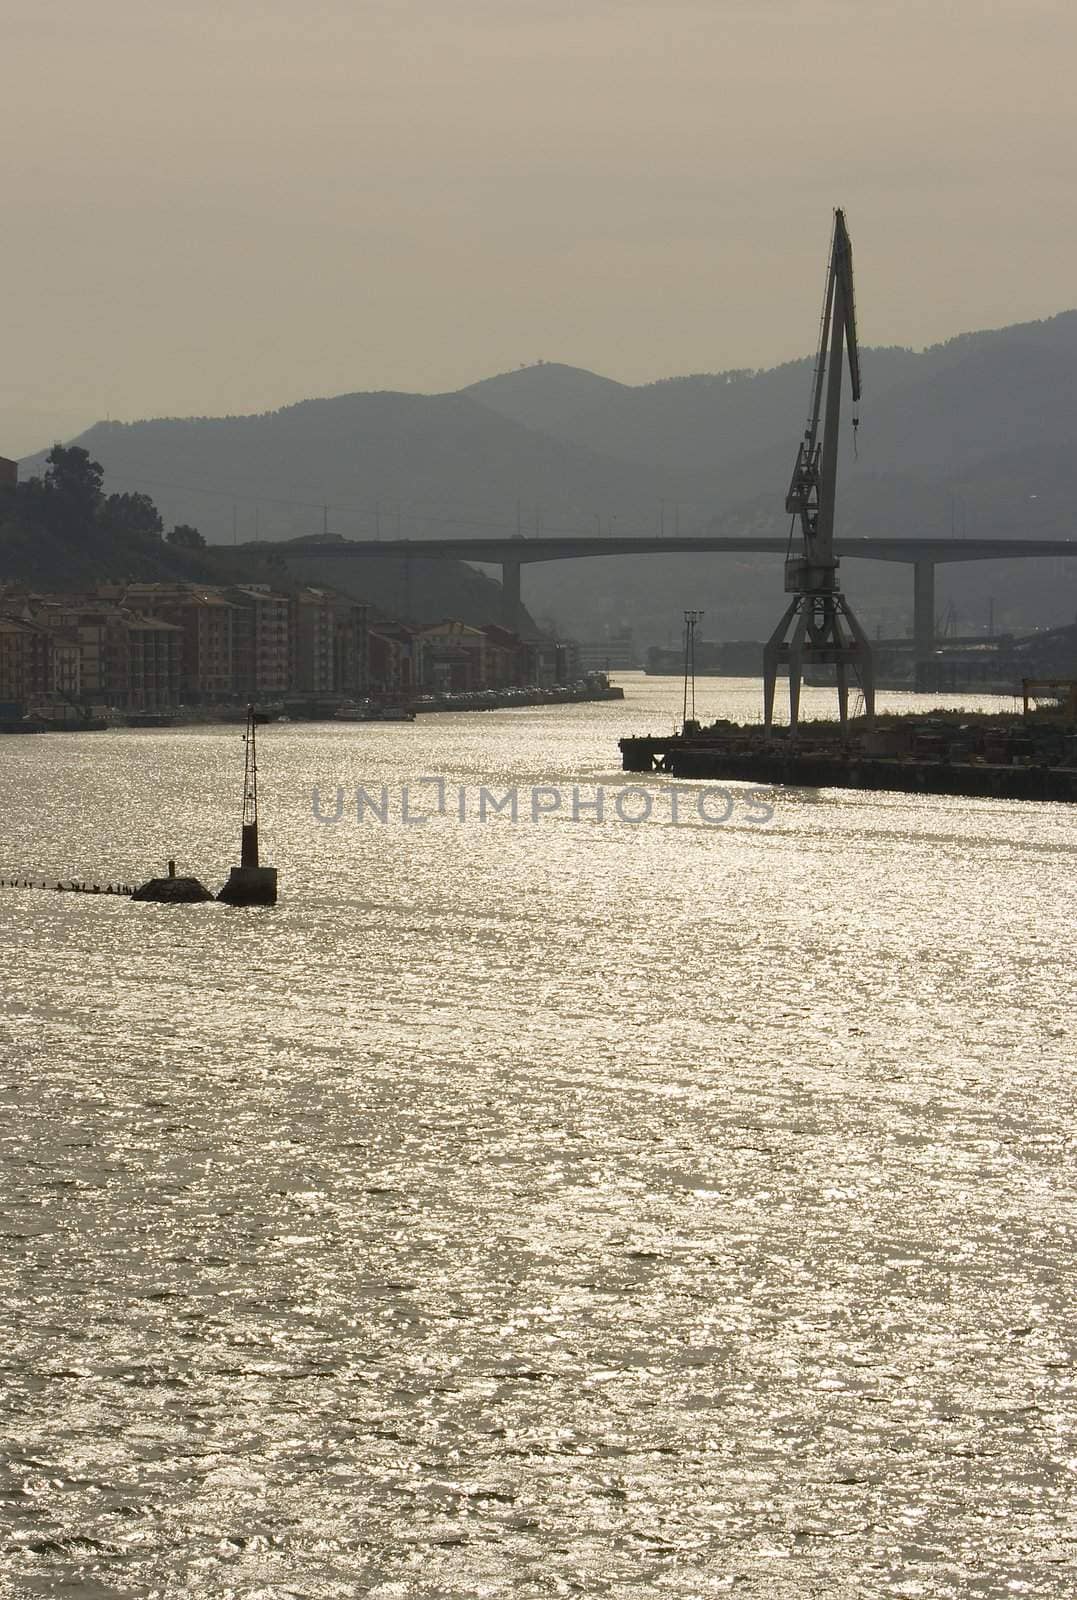 image of the estuary of Bilbao, old and heavy industry